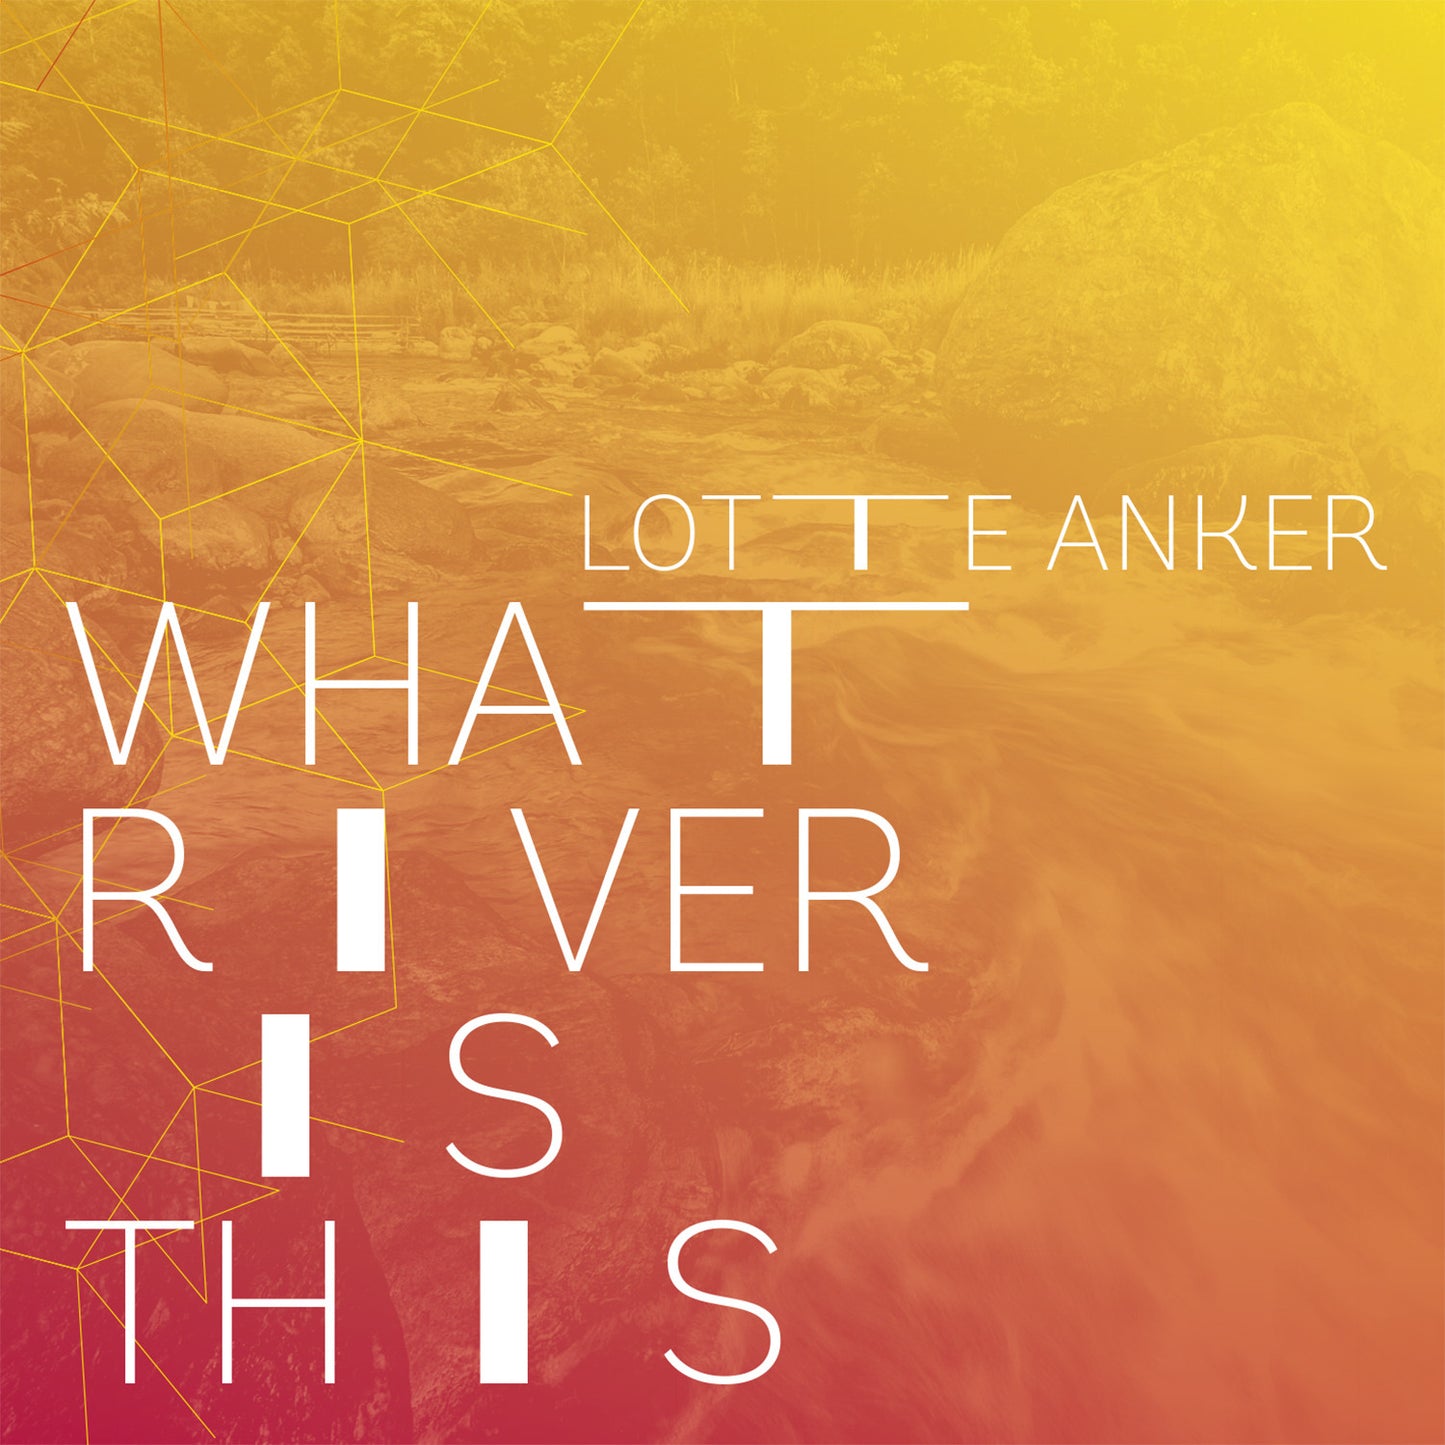 Lotte Anker: What River is This